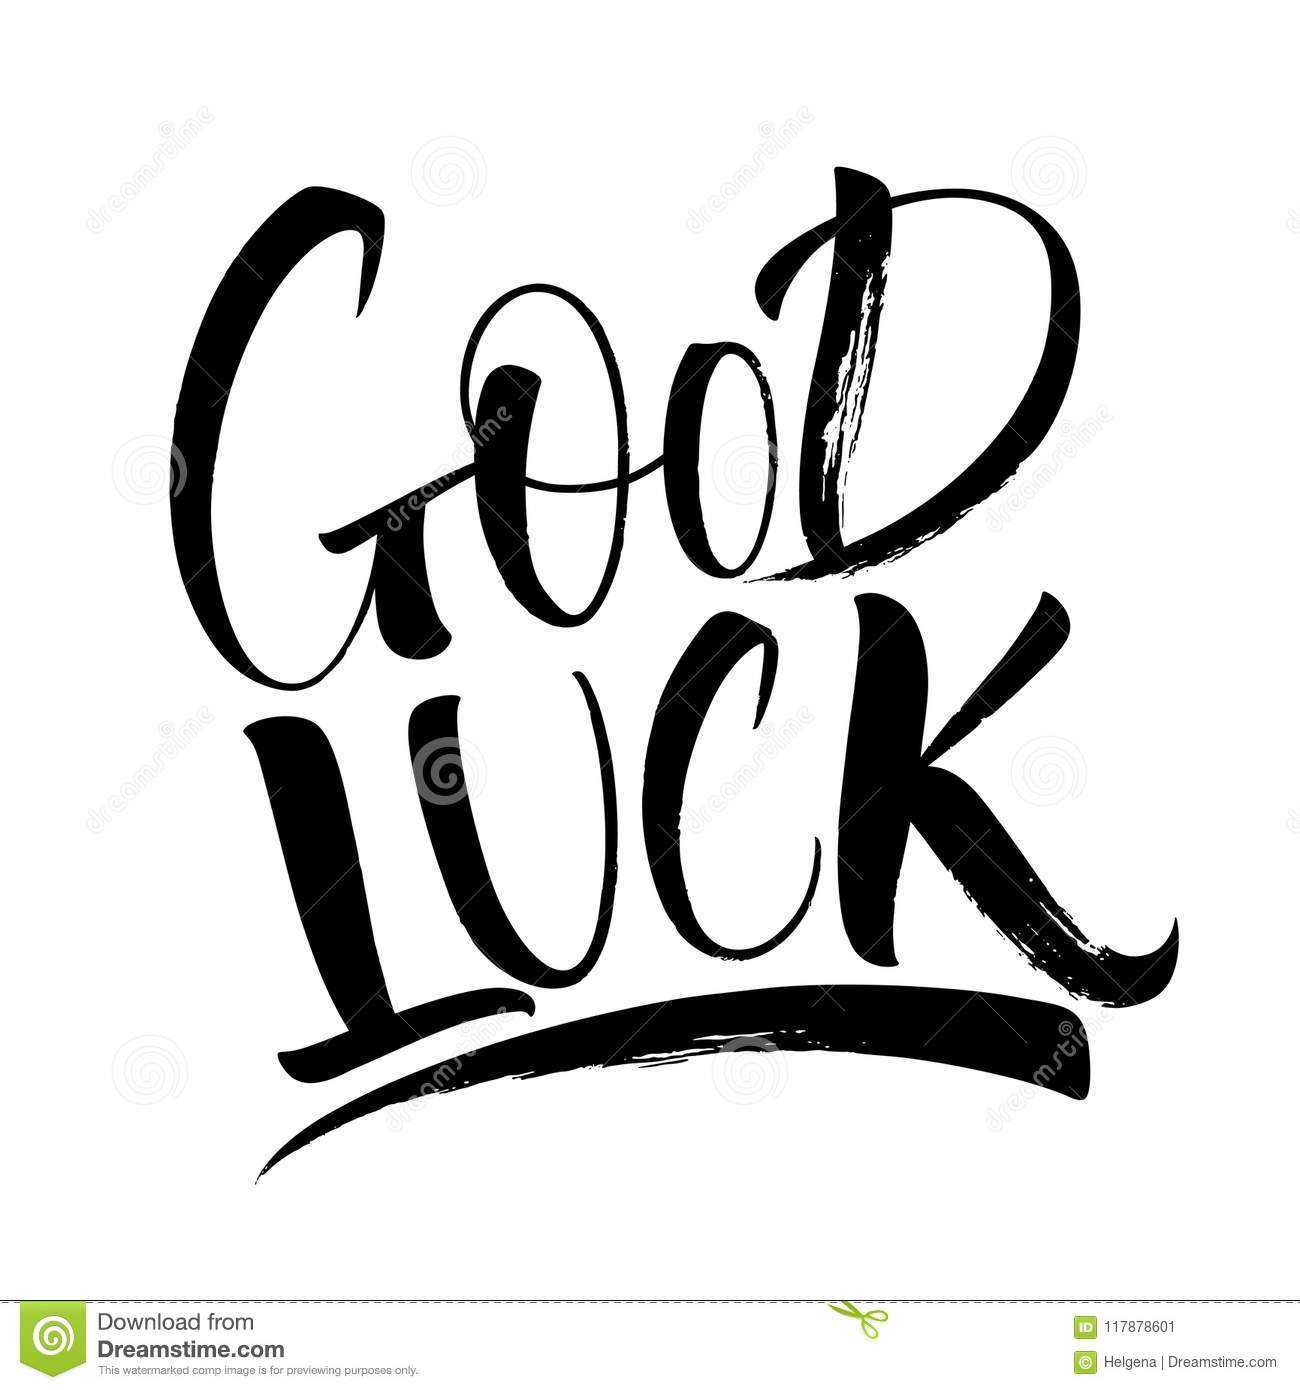 Good Luck Lettering Stock Vector. Illustration Of Good For Good Luck Card Templates